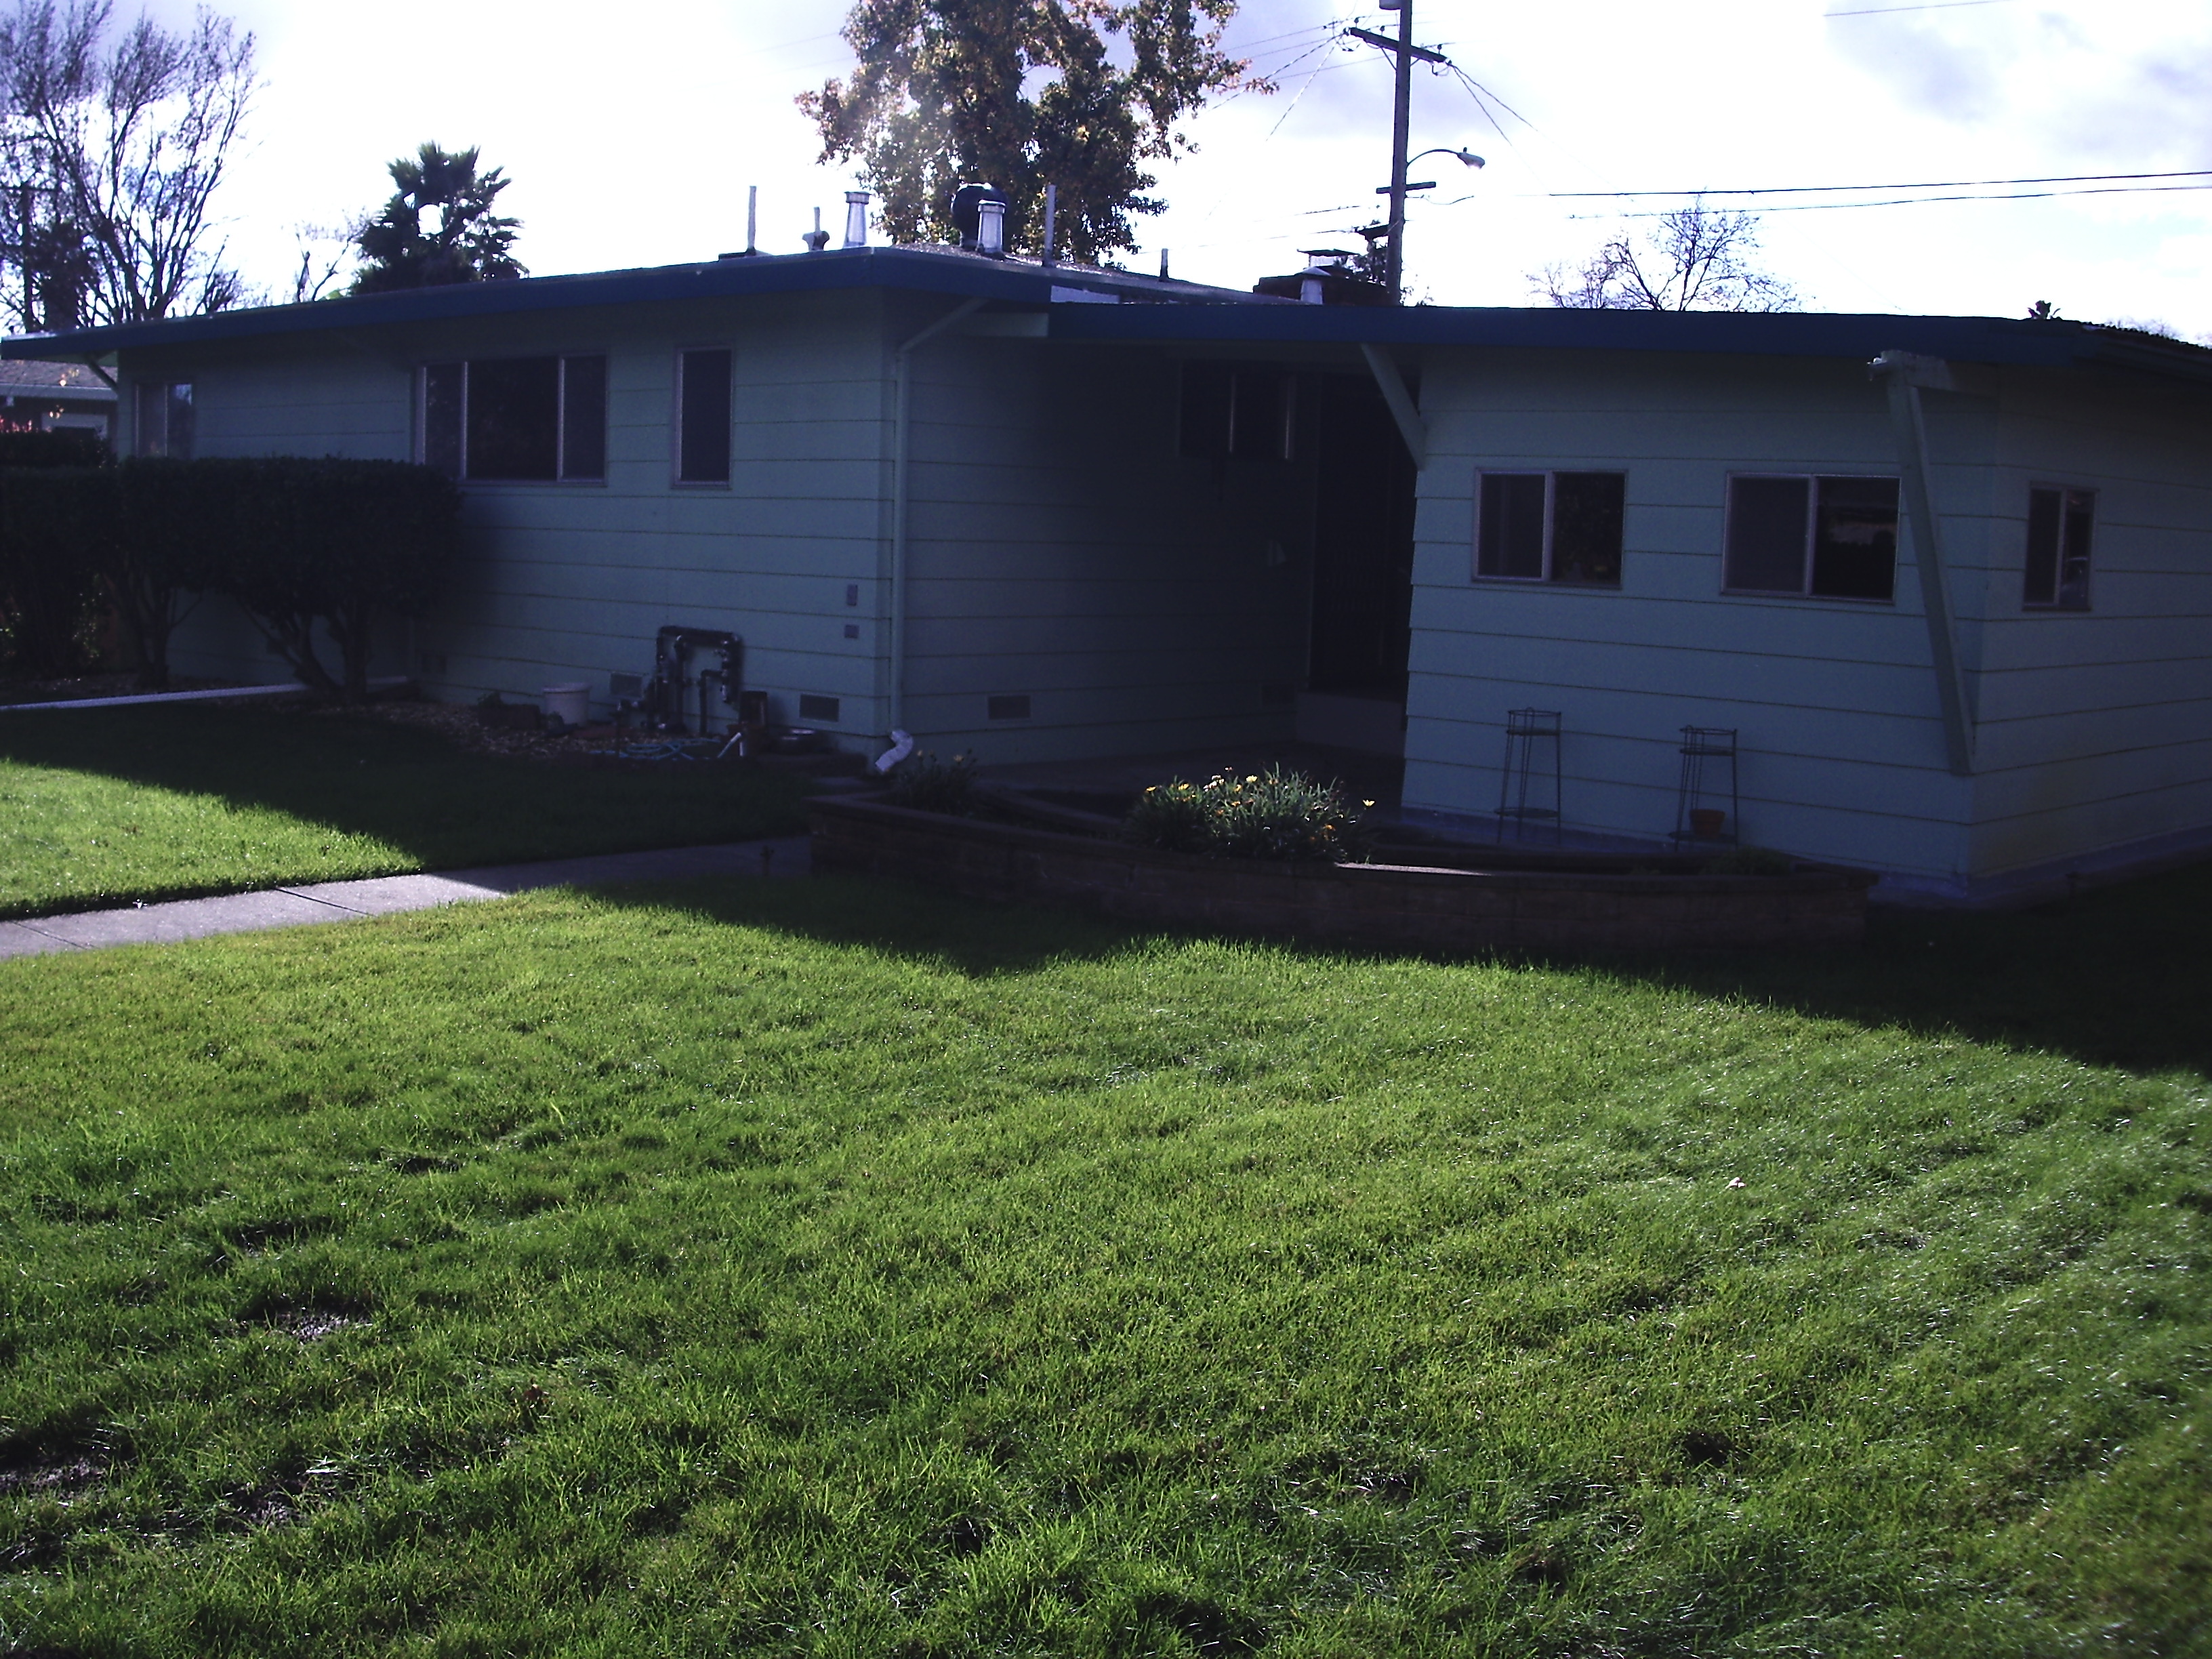 Benicia Dr - BEFORE Roof Changes - flat